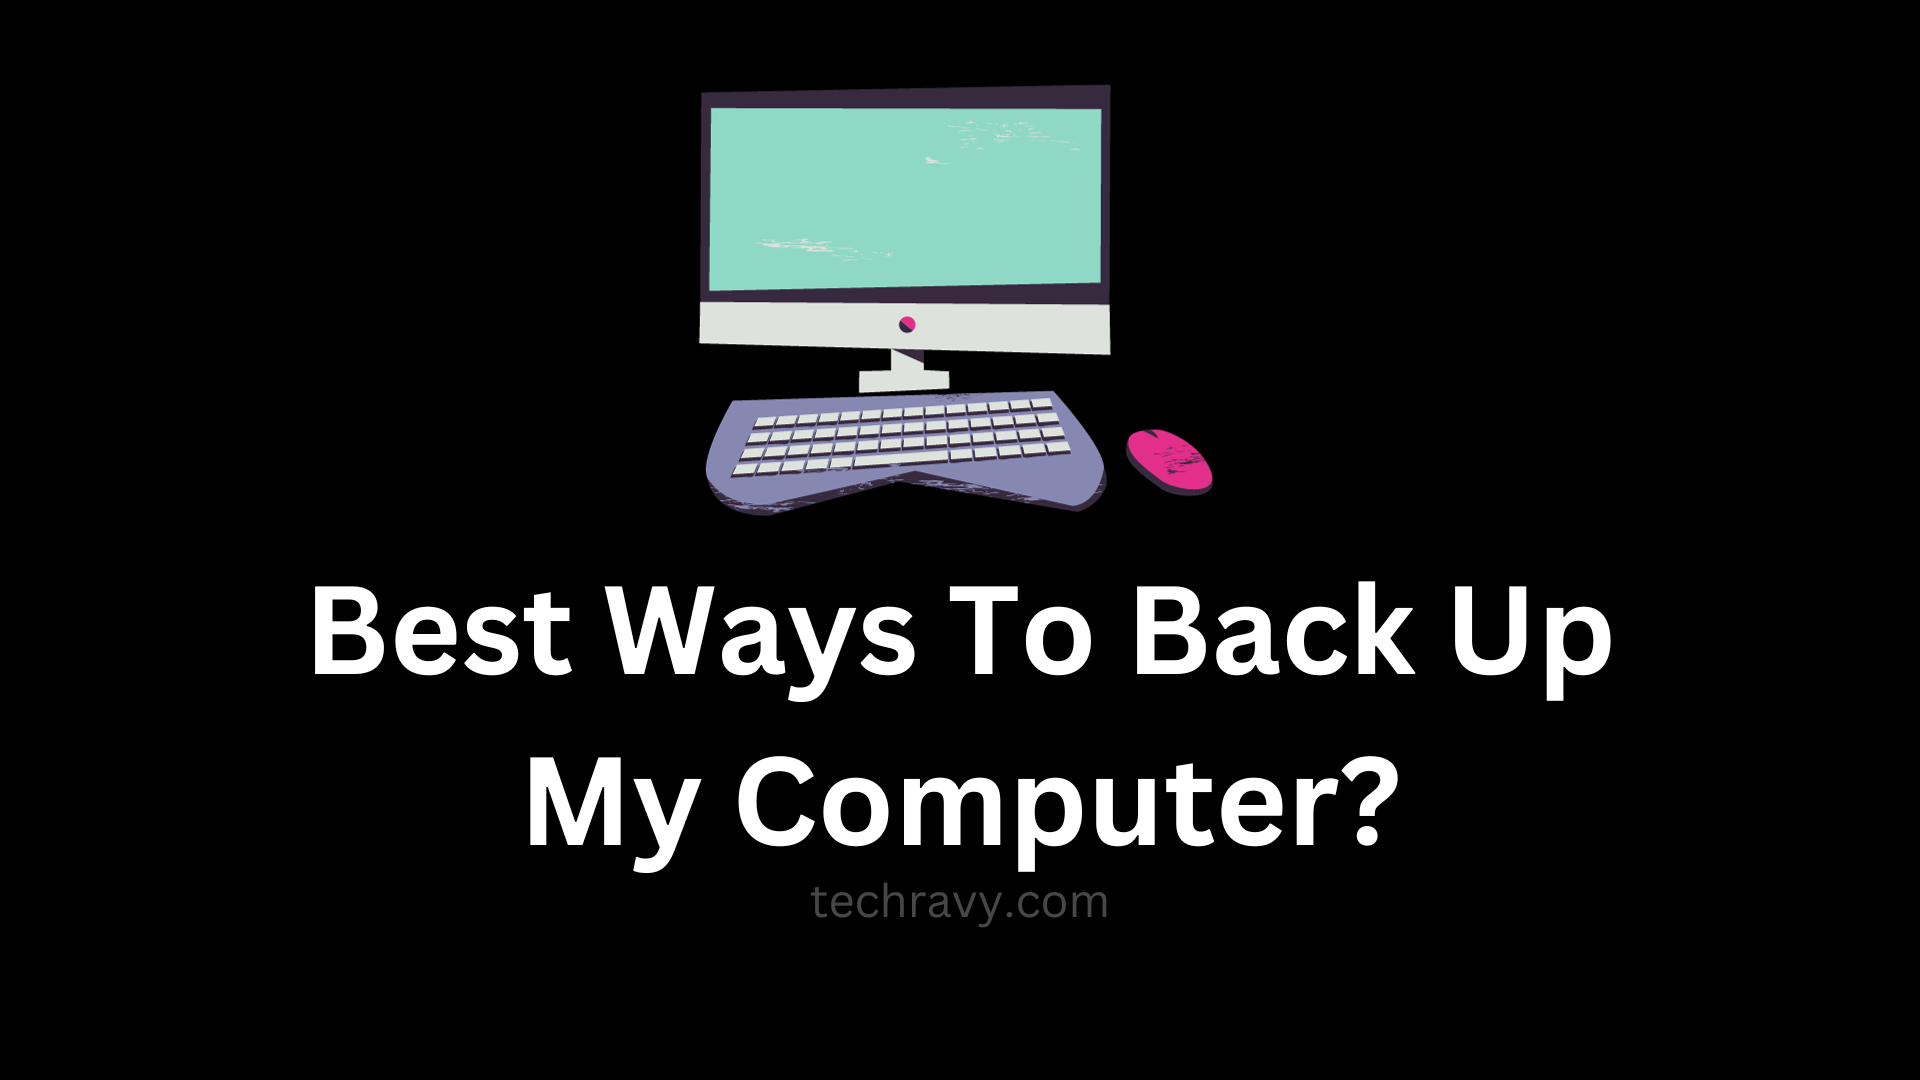 Best Ways To Back Up My Computer and save data